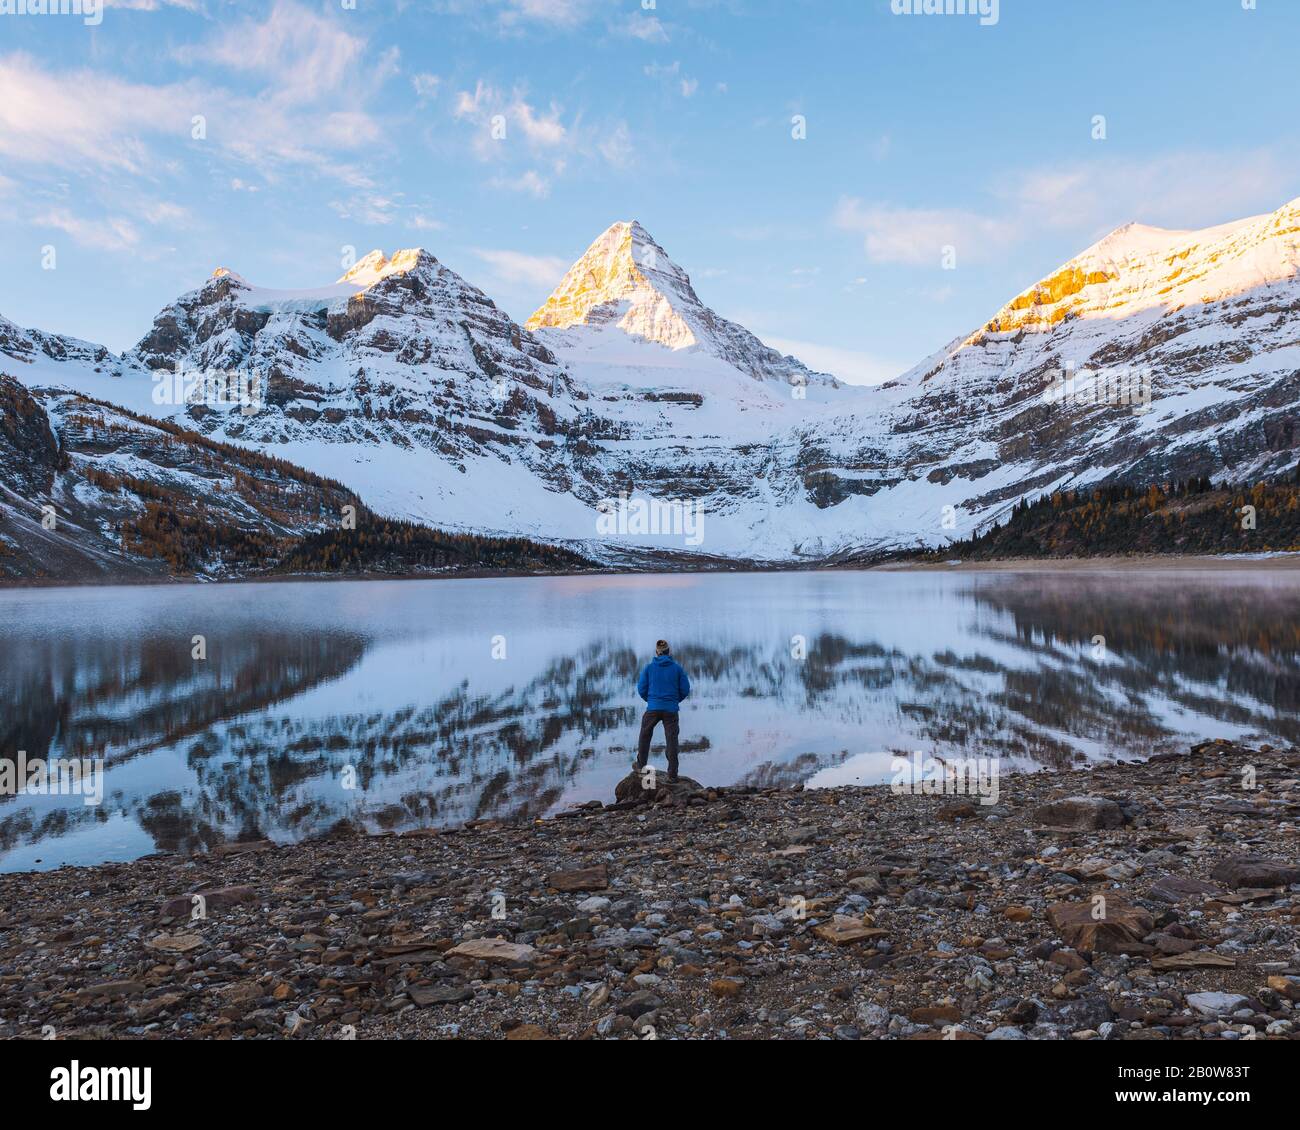 A man taking in the view across a lake to the panoramic view of Mount Assiniboine, Great Divide, Canadian Rockies, Alberta, Canada Stock Photo